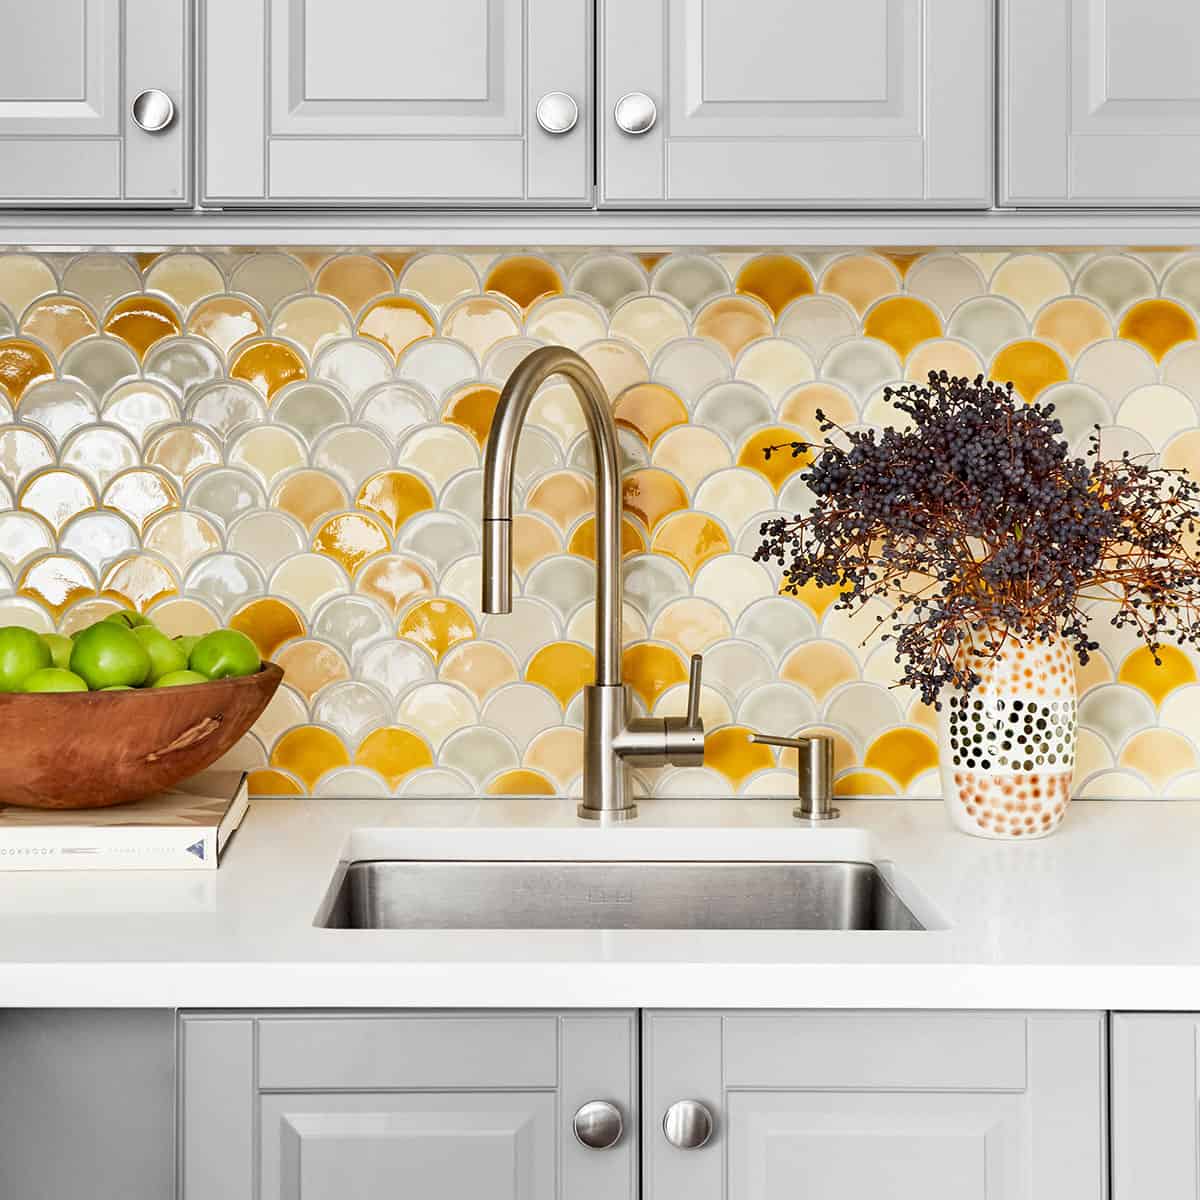 Bright colors add definition and pops of color to your backsplash